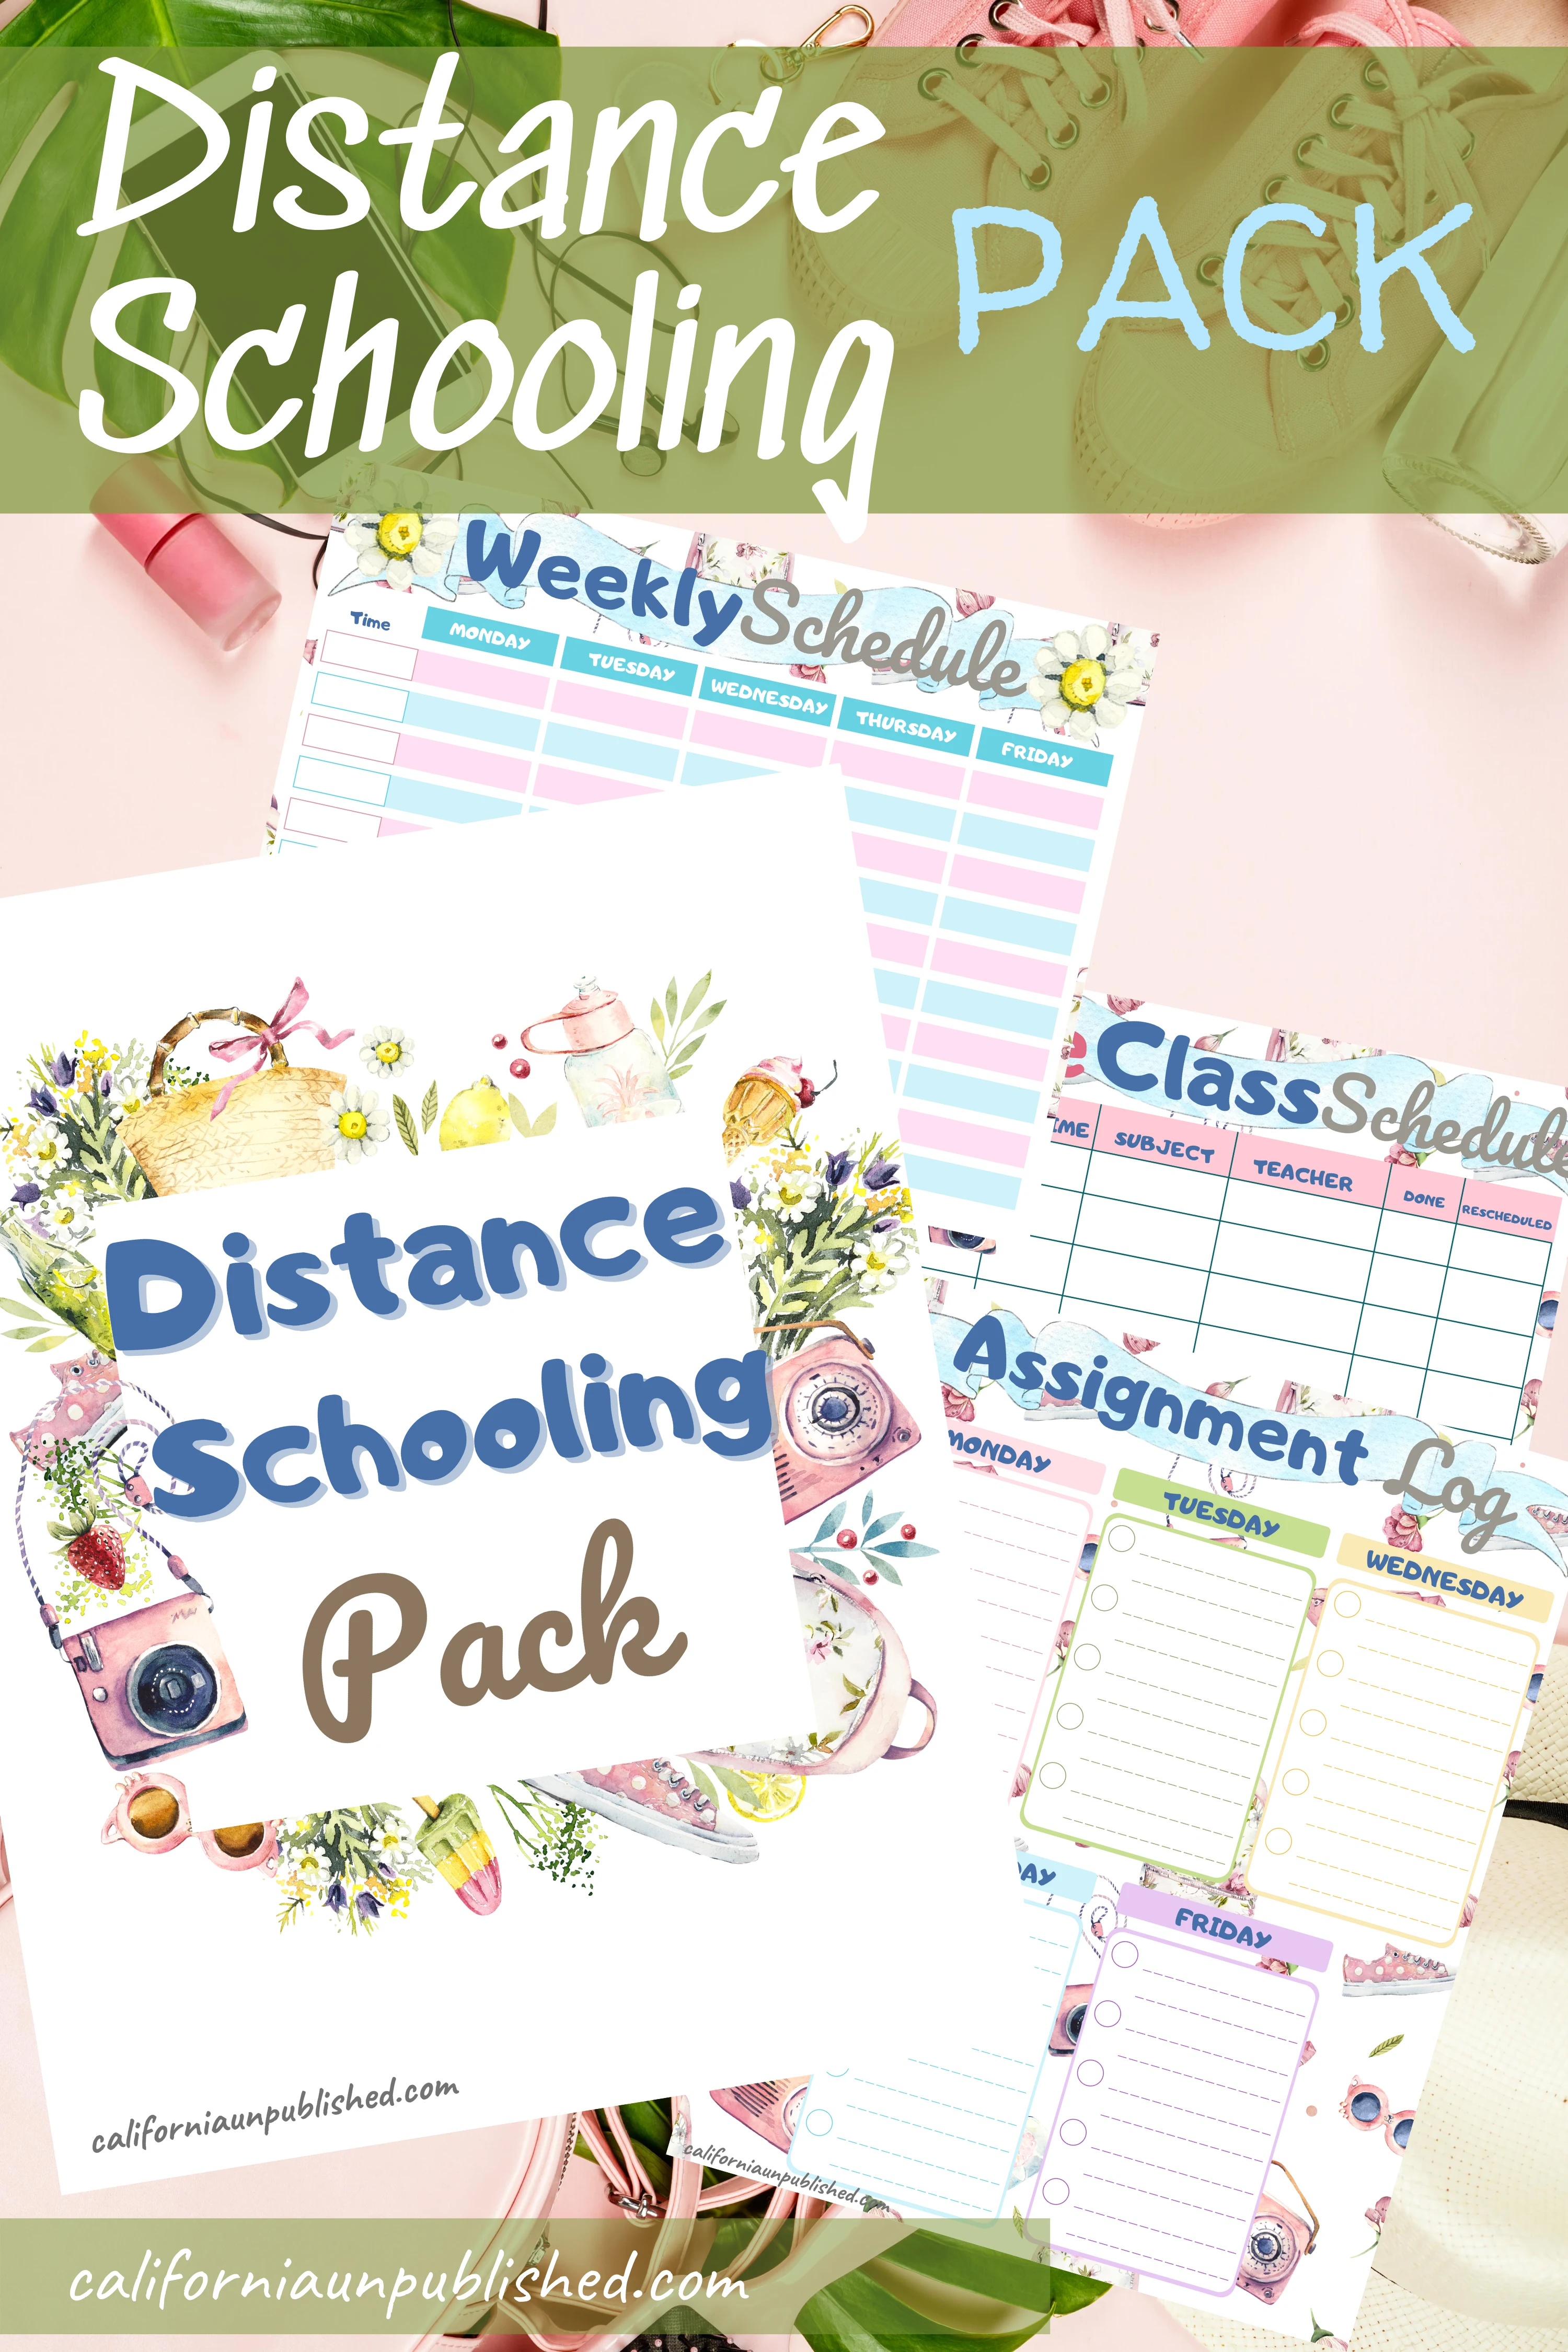 How to Make The Best of Distance Learning - Free Distance Learning Planner Printable